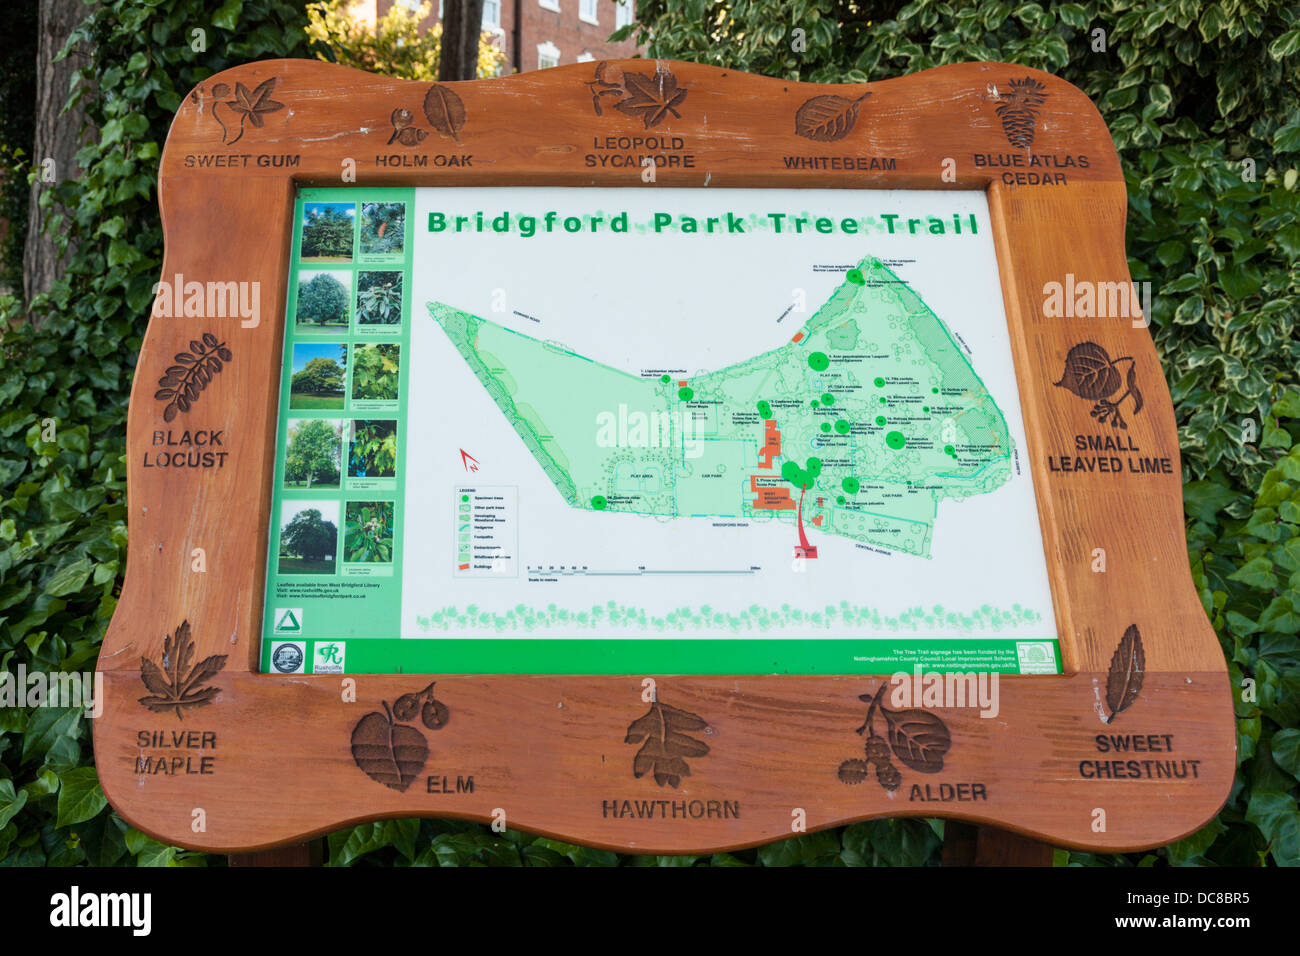 A sign showing a tree trail at Bridgford Park, West Bridgford, Nottinghamshire, England, UK Stock Photo